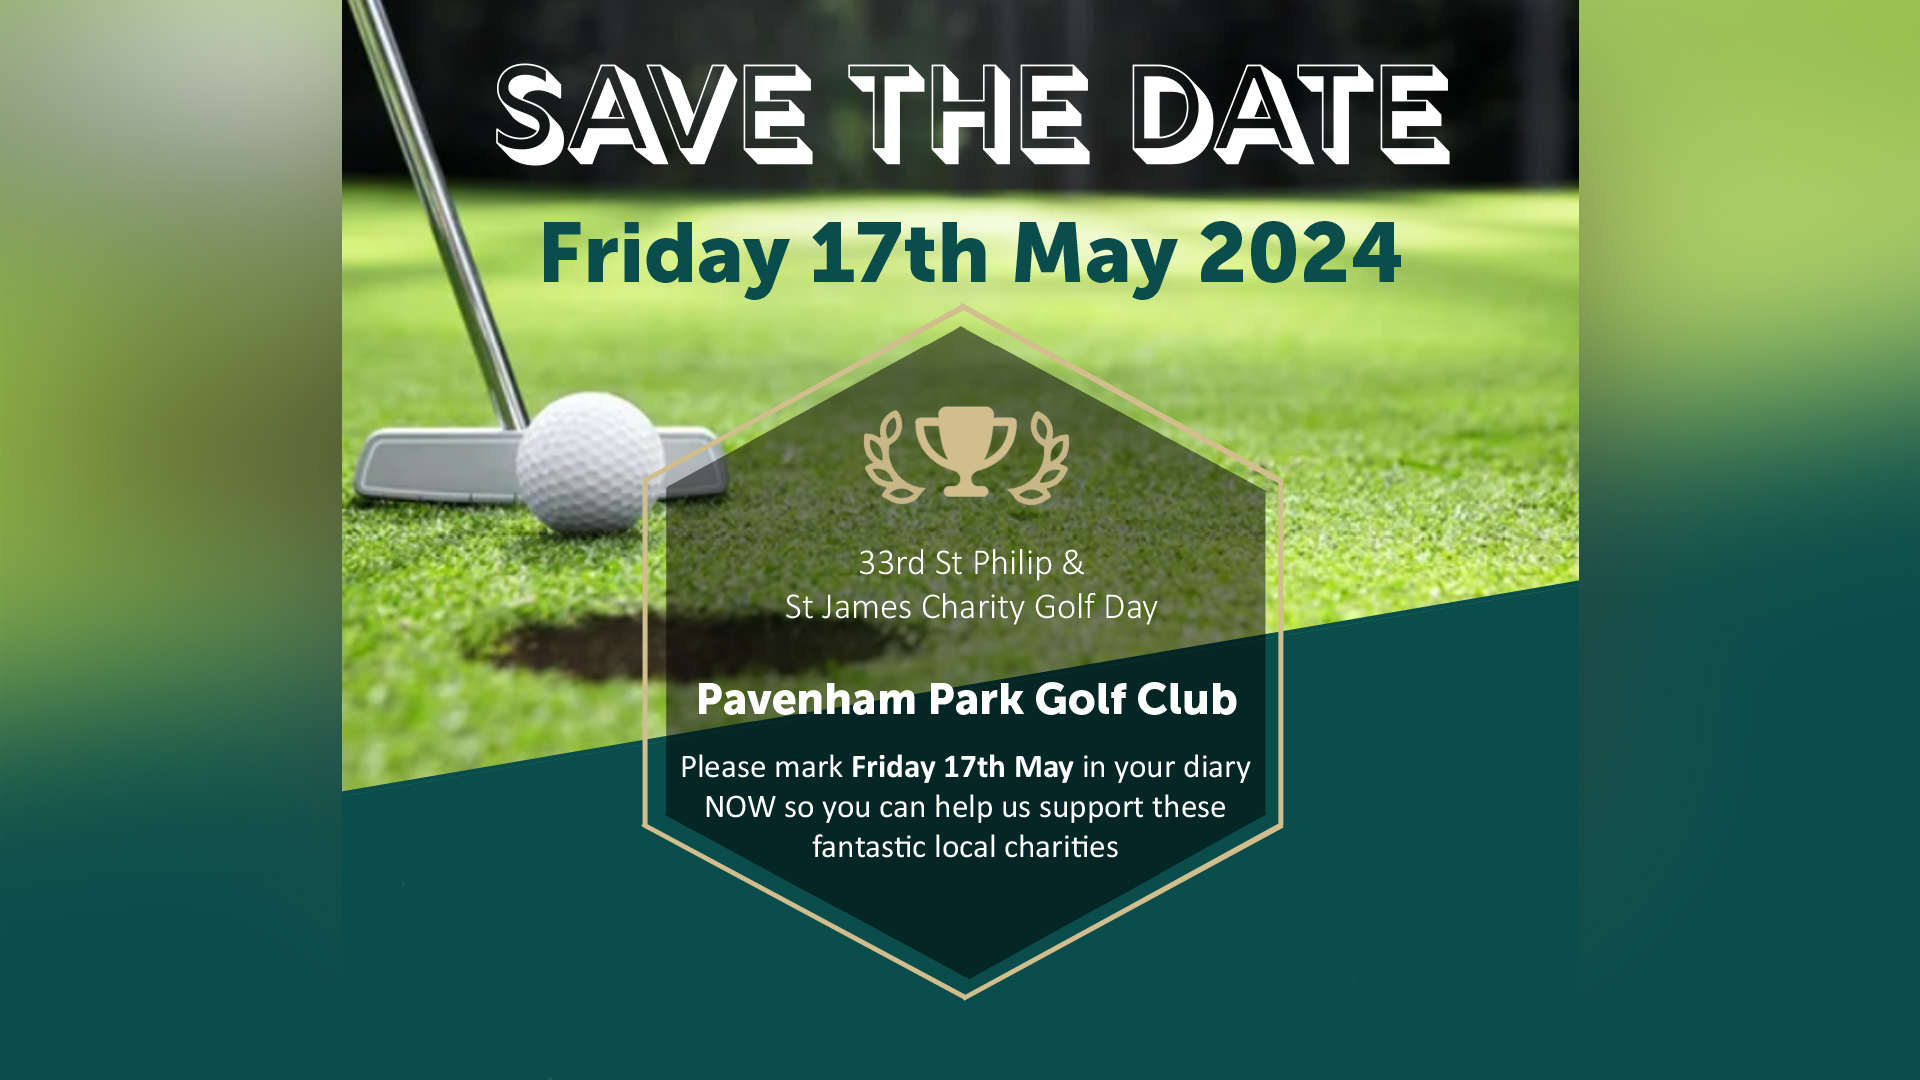 Save the date, Friday 27th May 2024